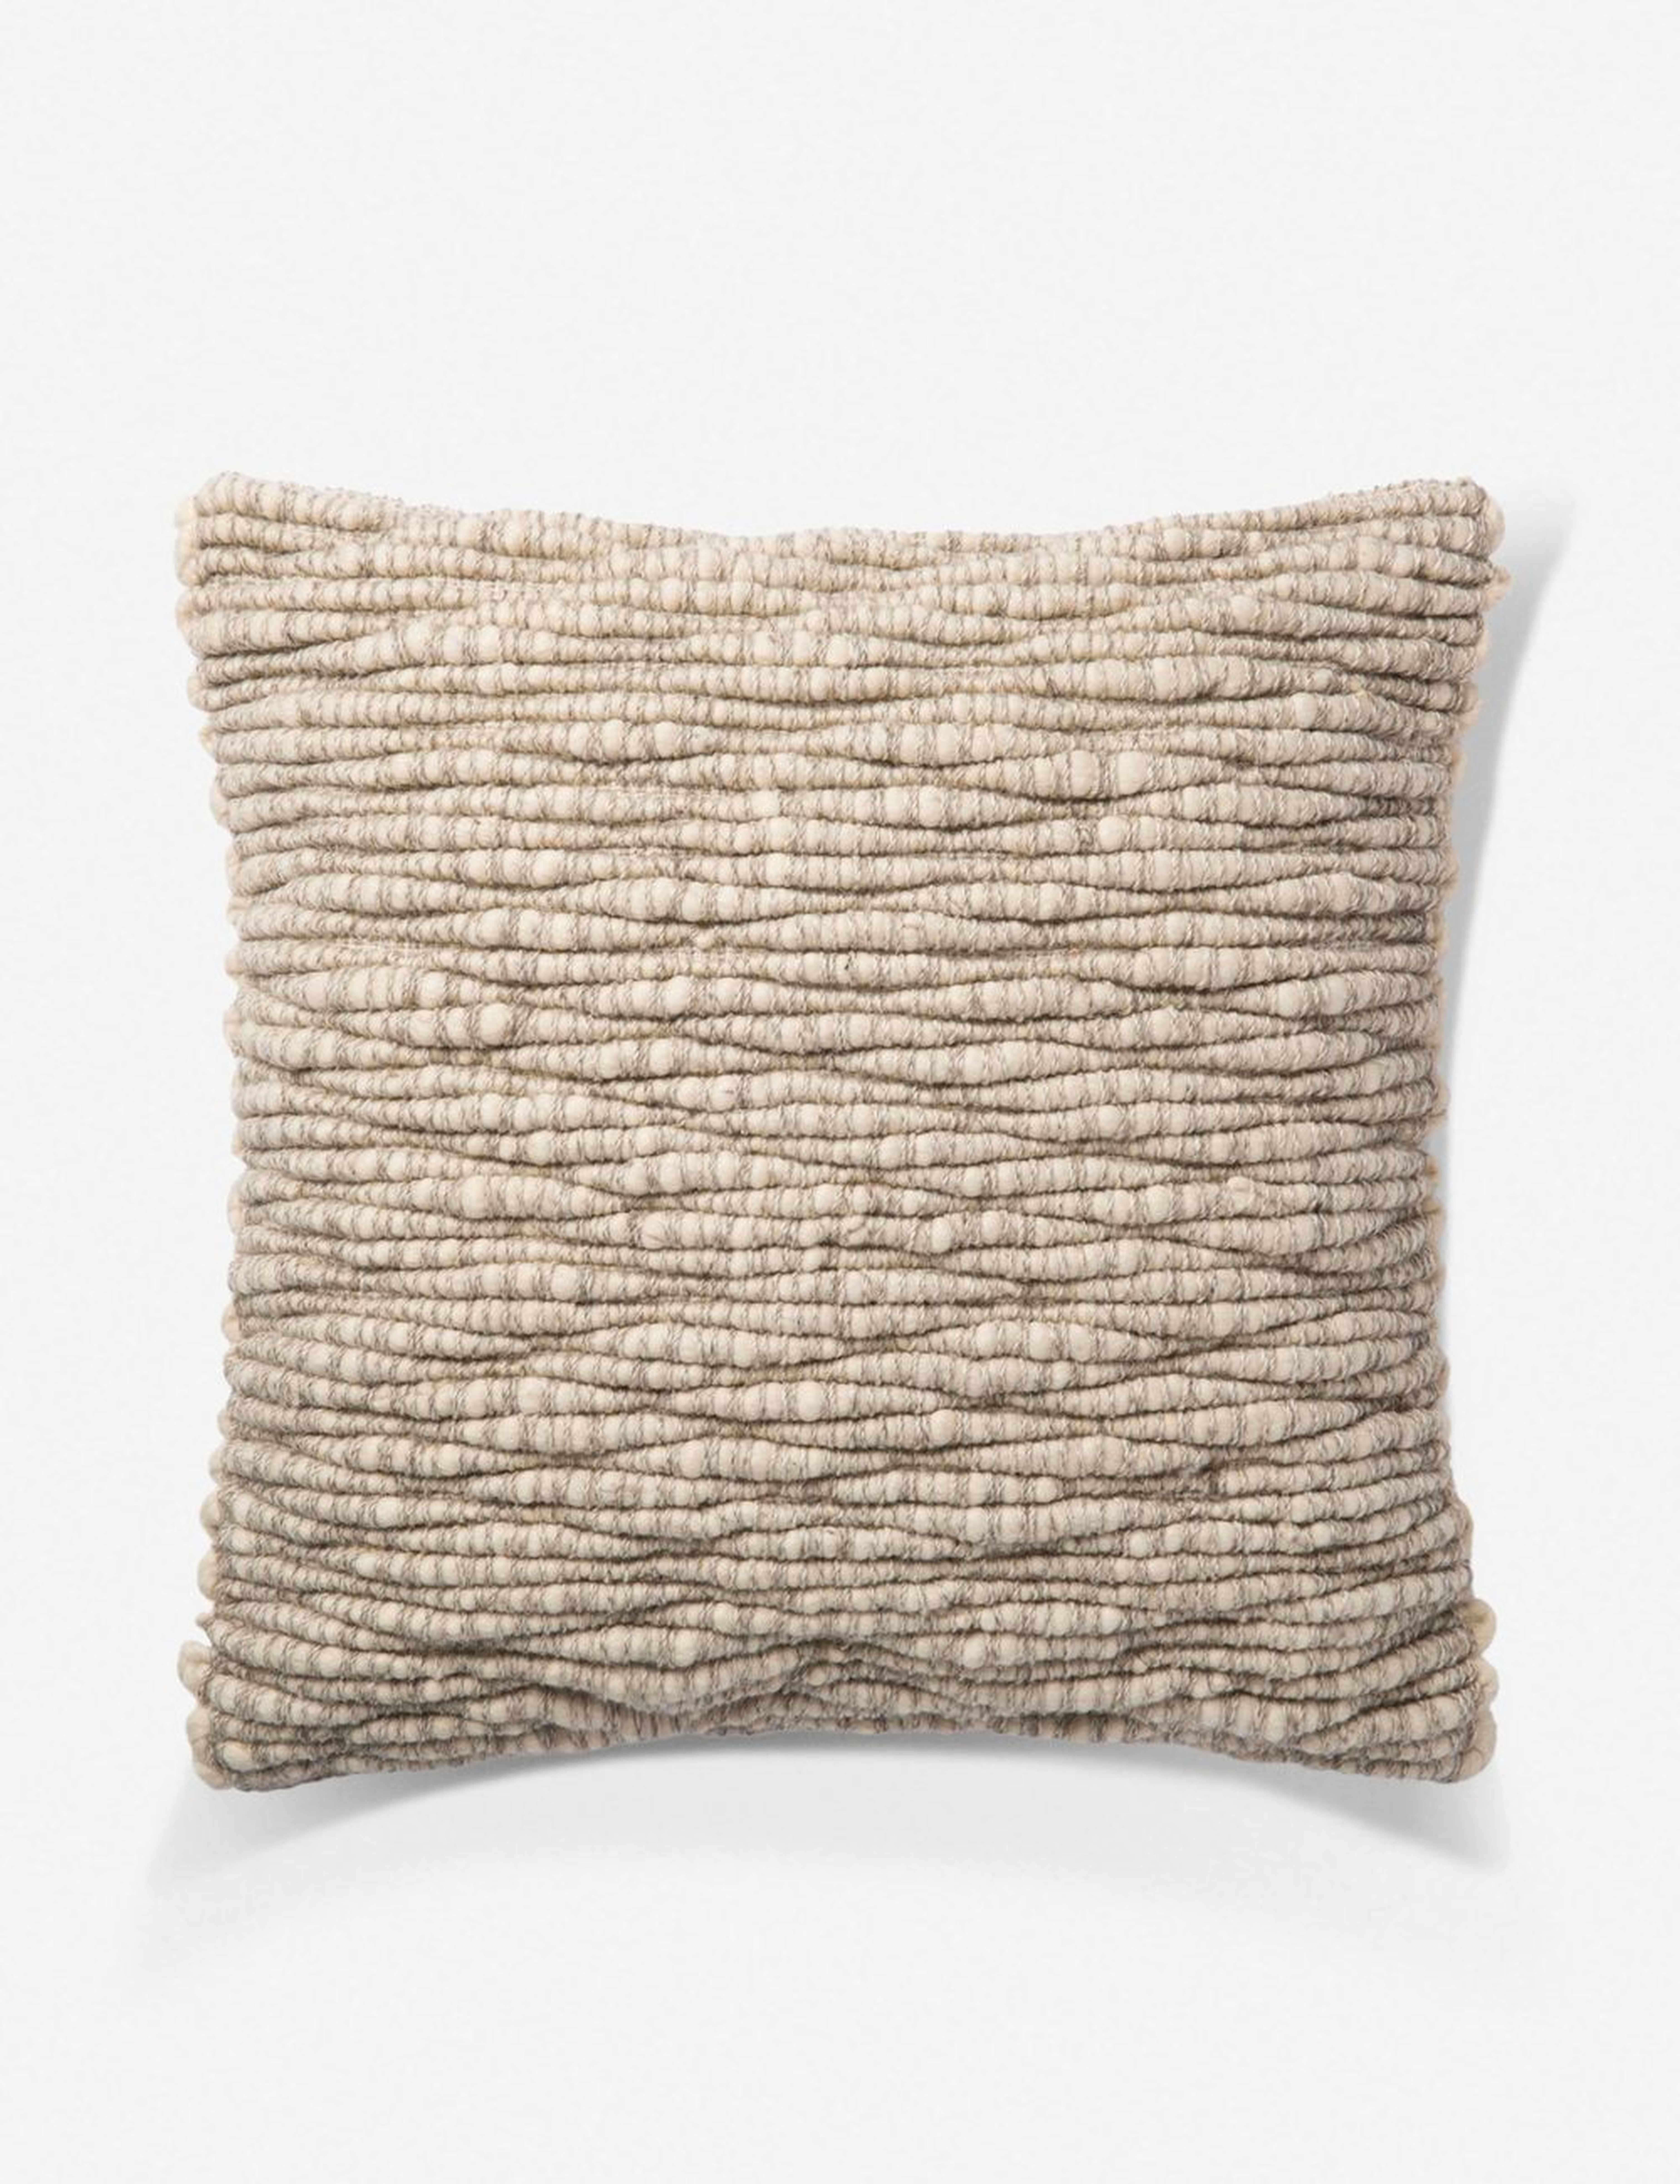 COLMA PILLOW, NATURAL, ED ELLEN DEGENERES CRAFTED BY LOLOI - Lulu and Georgia